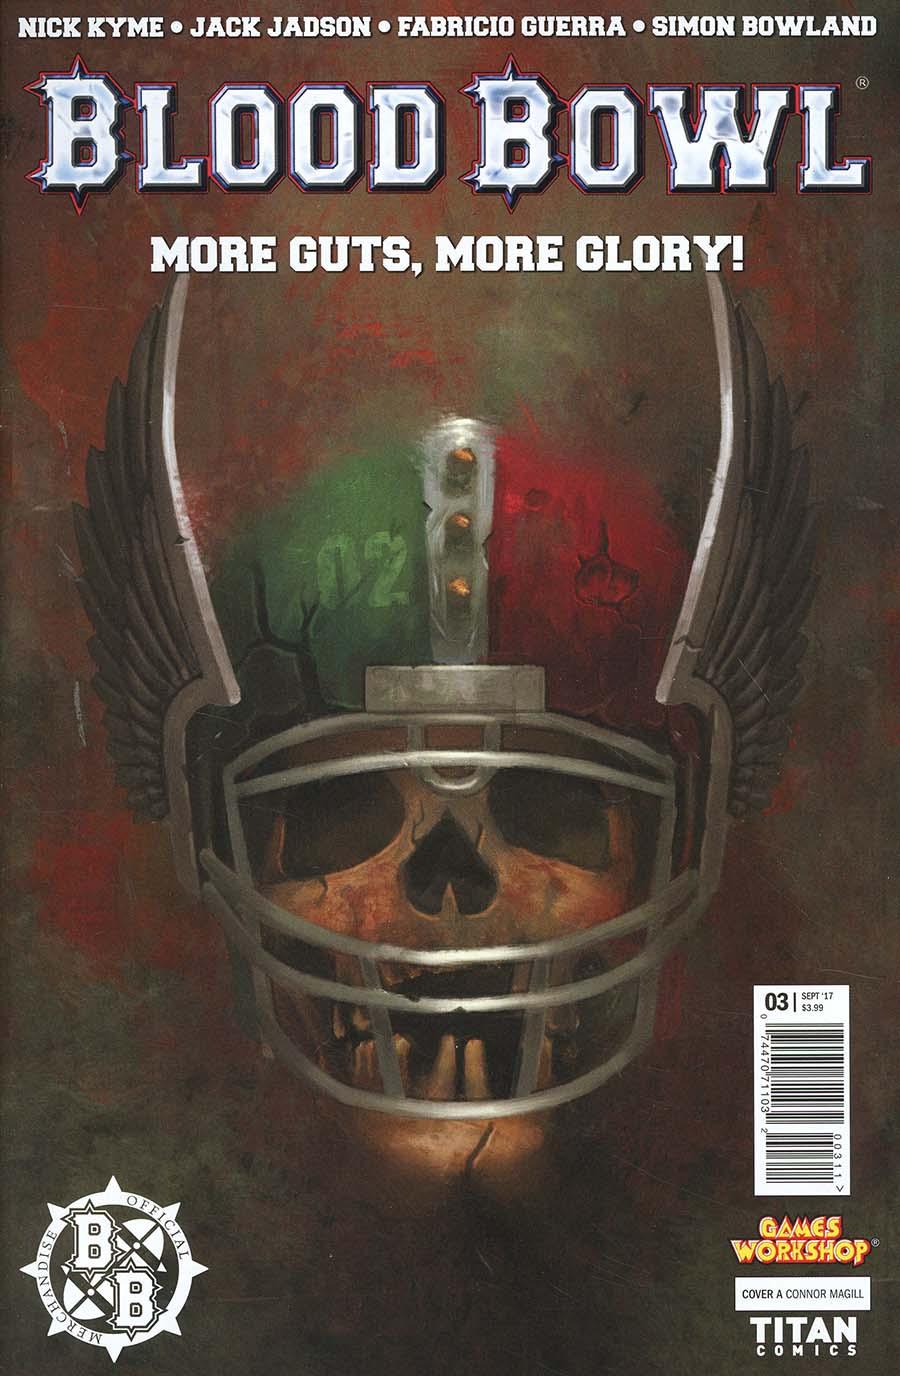 Blood Bowl More Guts More Glory Vol. 1 #3